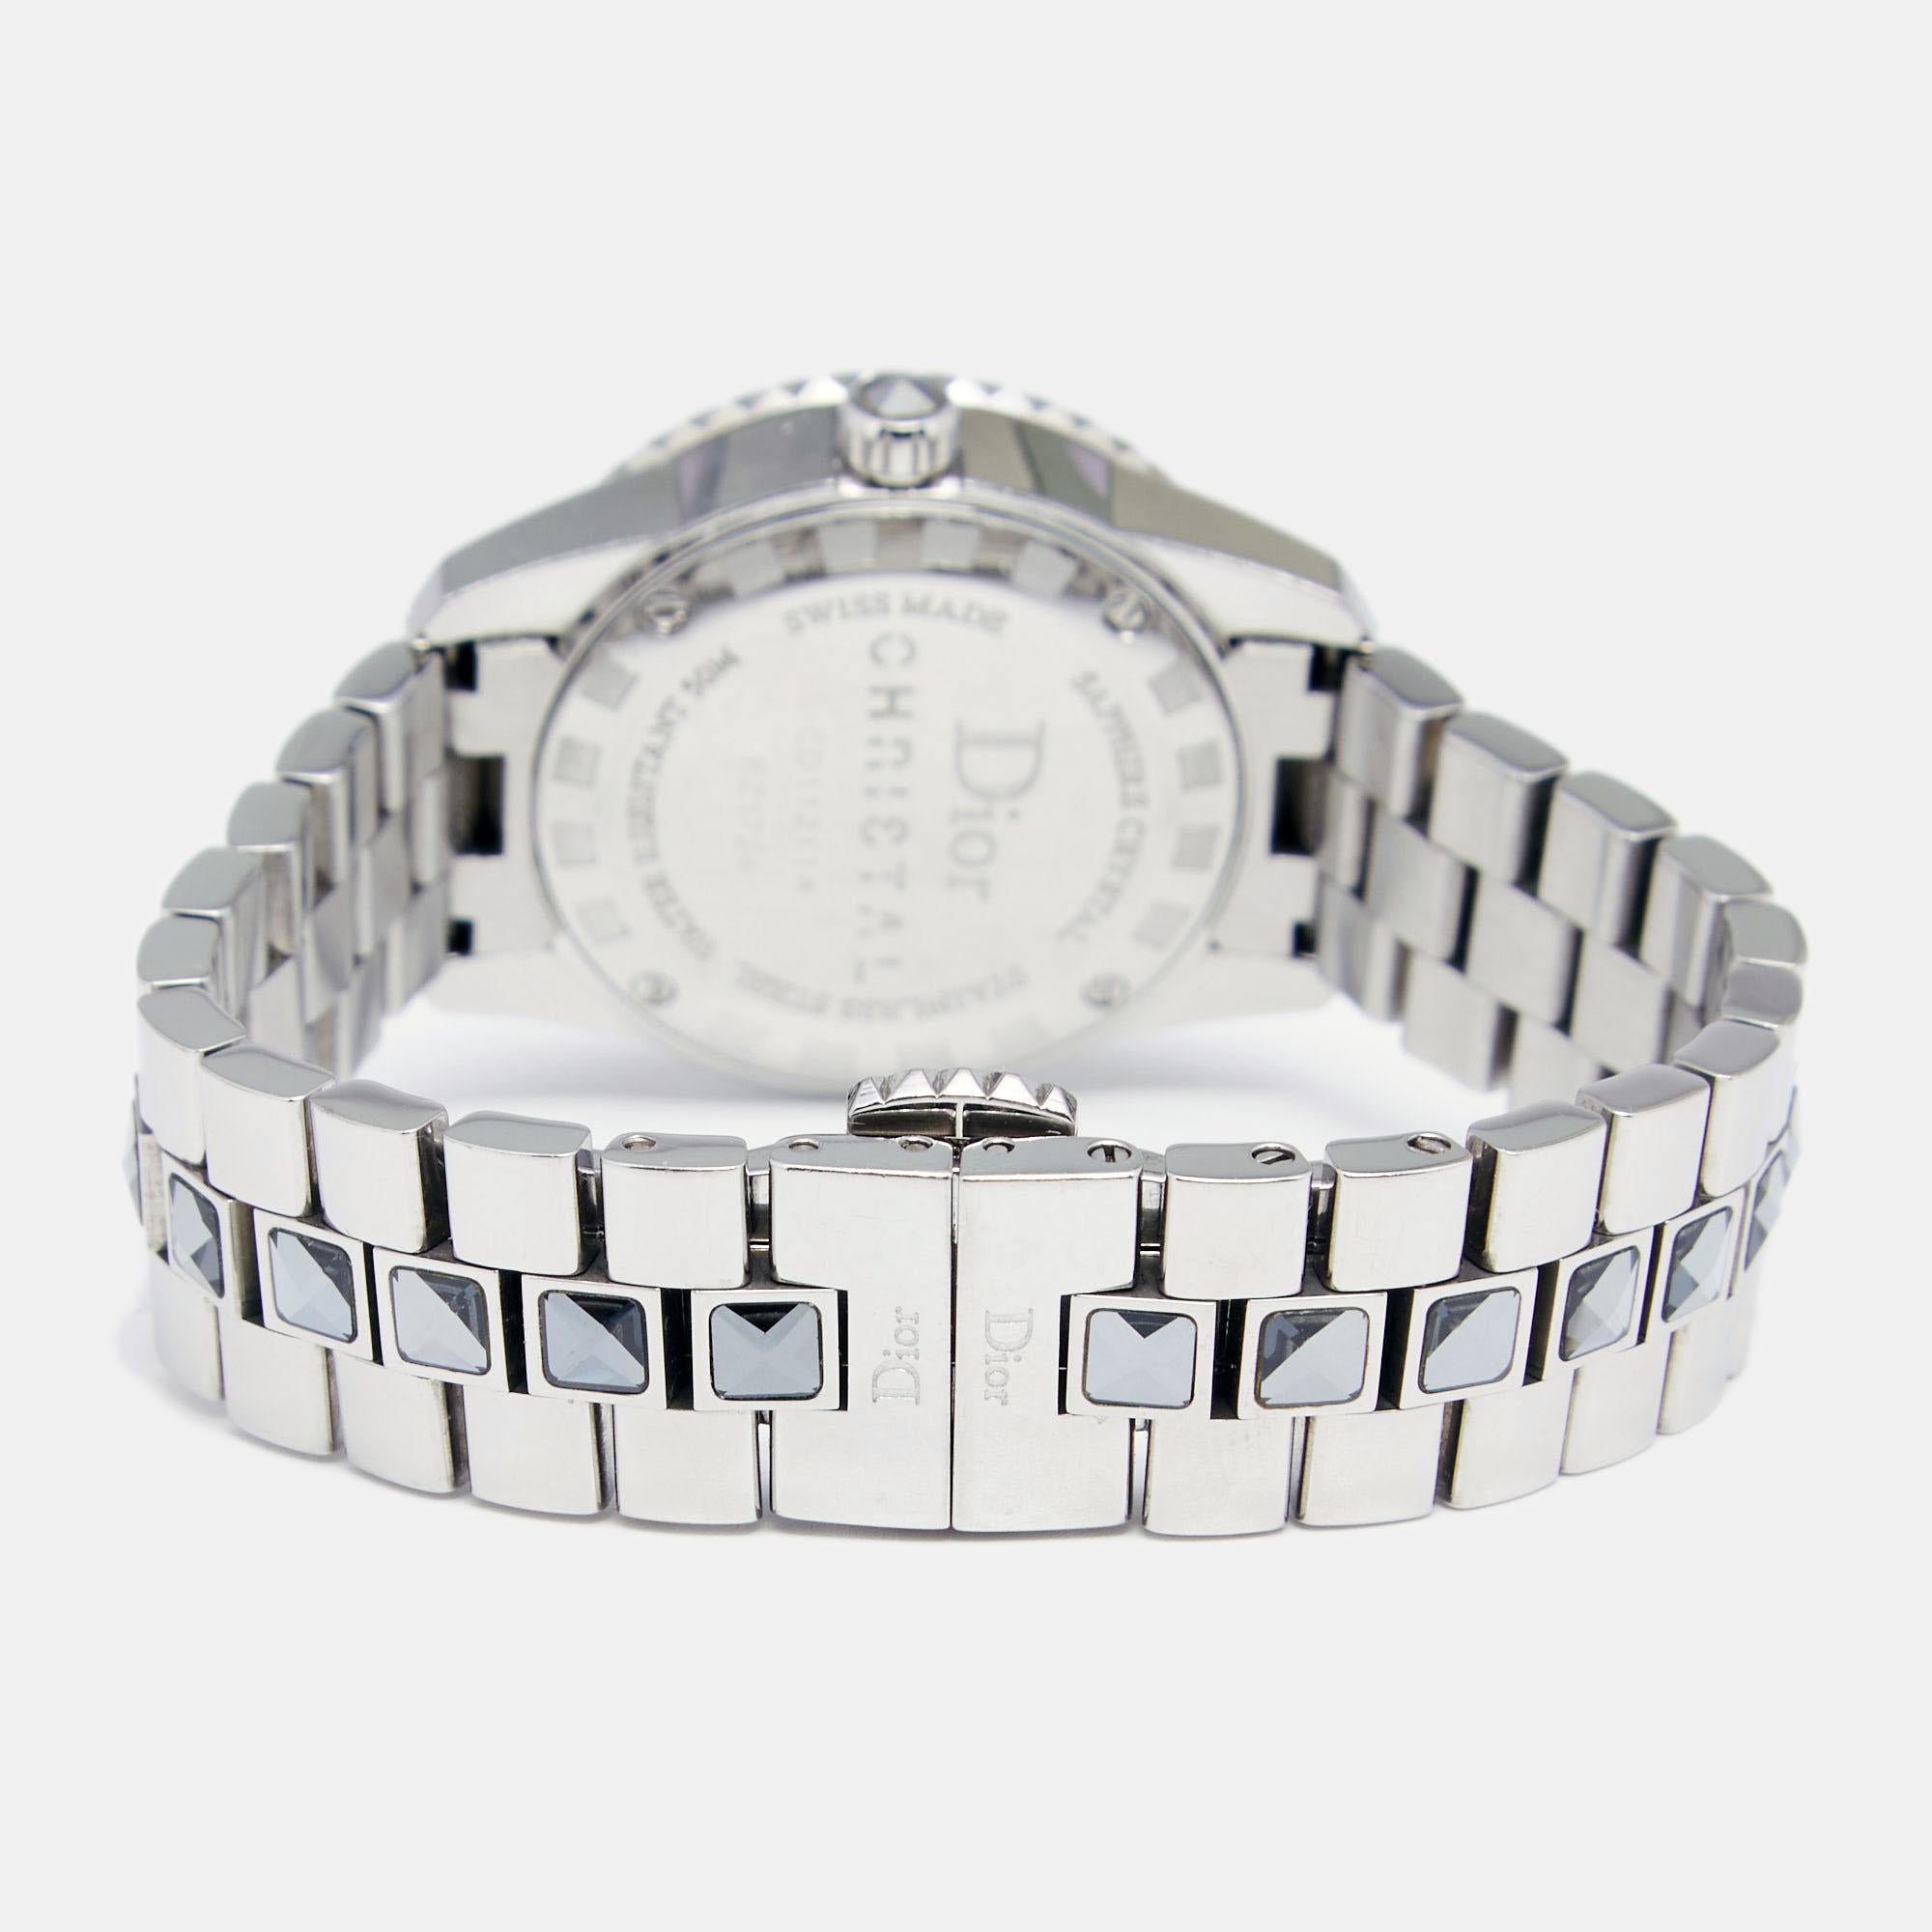 Here's a timepiece that will not only assist you with the correct time but also elevate your style quotient. This Dior watch is from their Christal collection, and it is Swiss-made. It has a stylish stainless steel case of diameter 28 mm with a